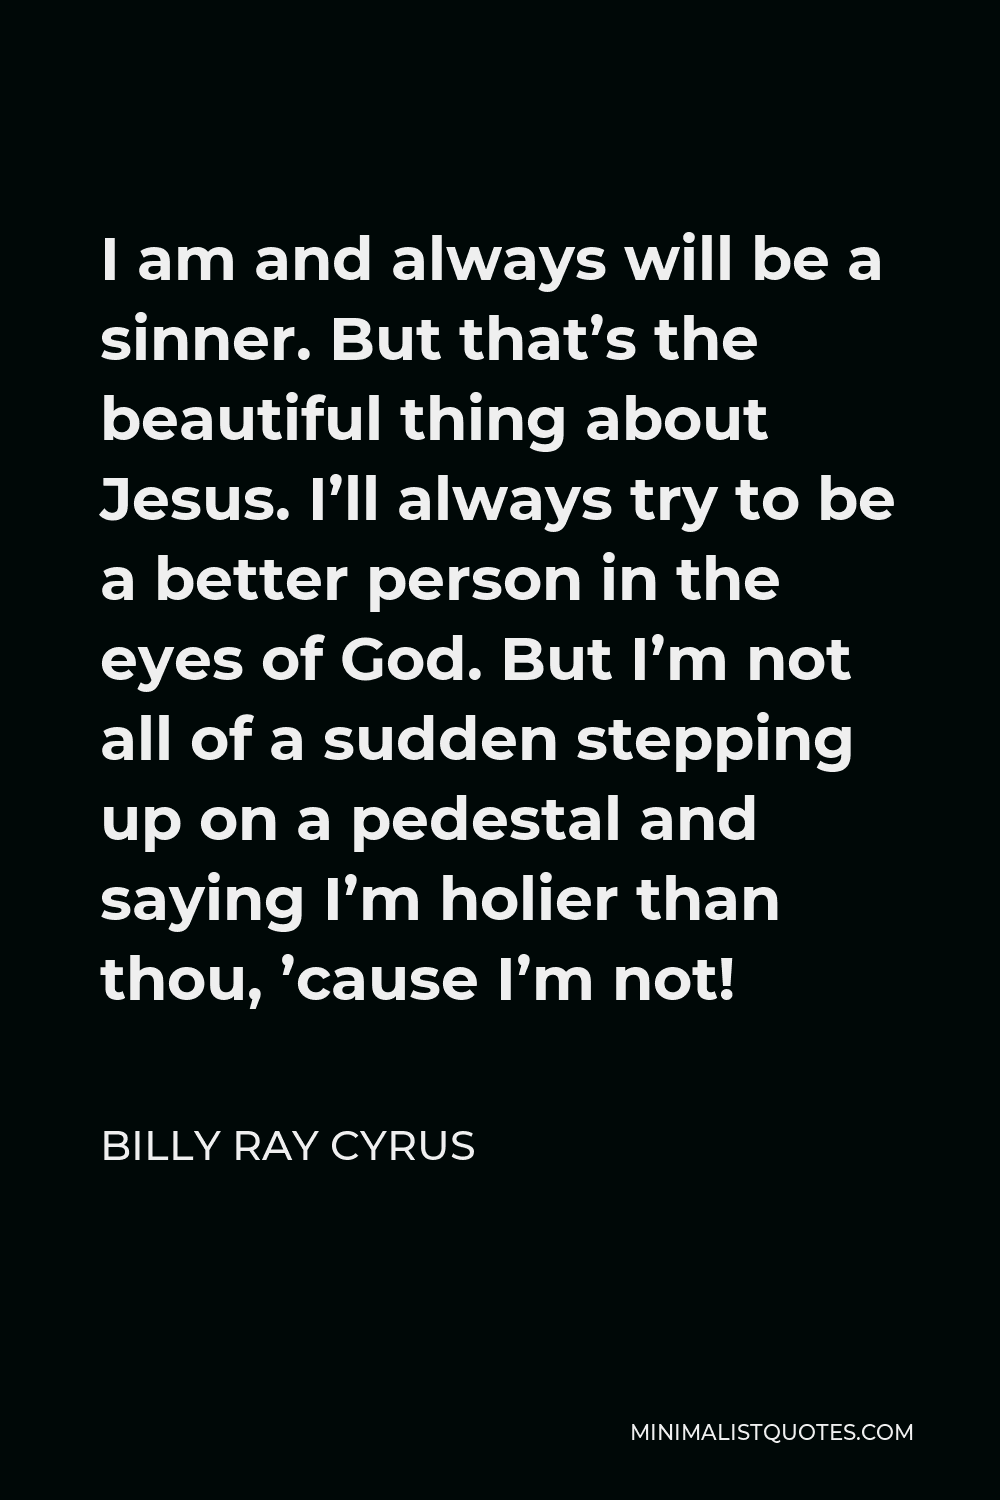 Billy Ray Cyrus Quote - I am and always will be a sinner. But that’s the beautiful thing about Jesus. I’ll always try to be a better person in the eyes of God. But I’m not all of a sudden stepping up on a pedestal and saying I’m holier than thou, ’cause I’m not!